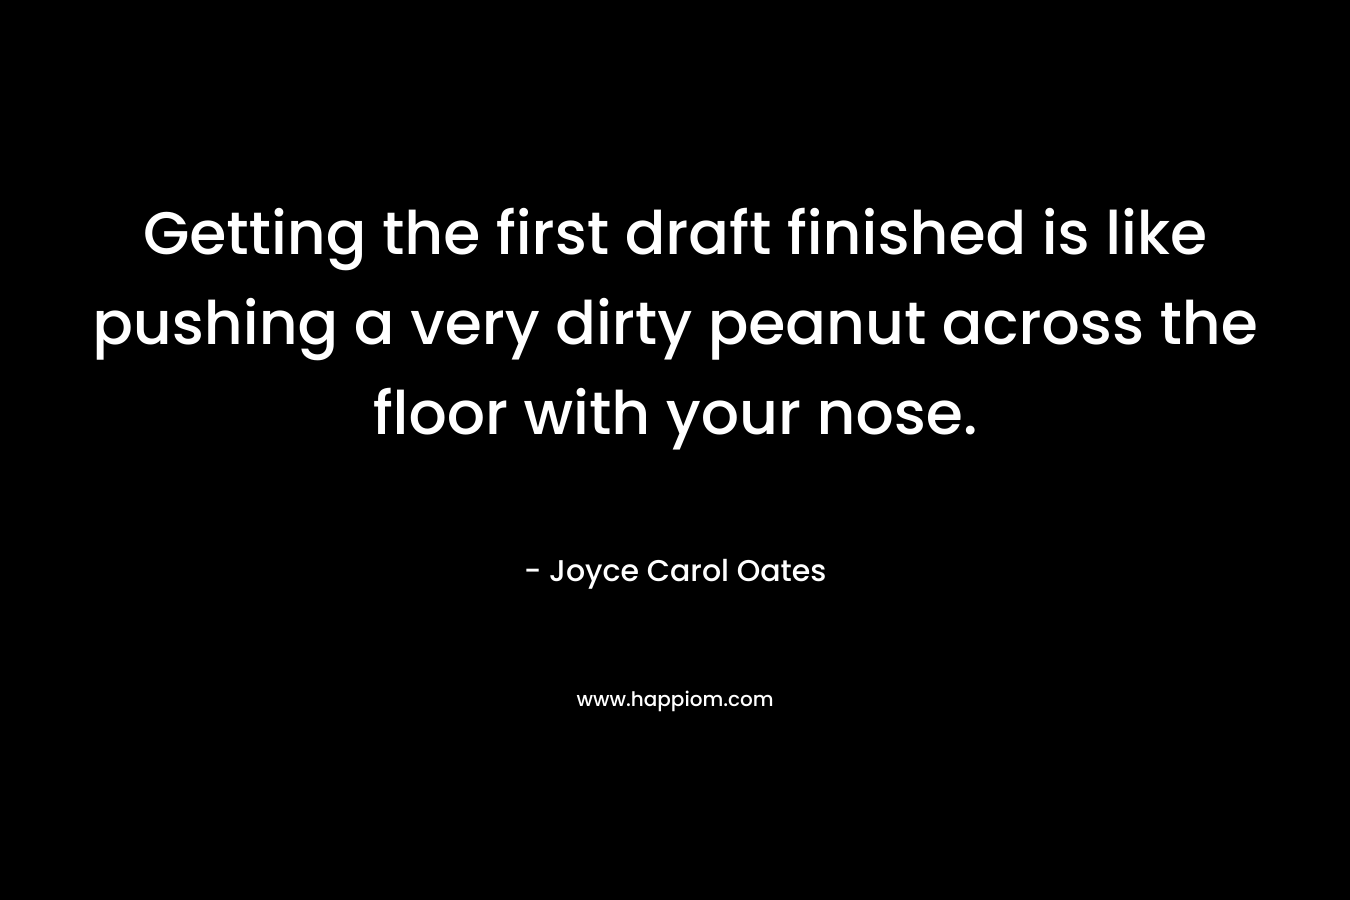 Getting the first draft finished is like pushing a very dirty peanut across the floor with your nose. – Joyce Carol Oates